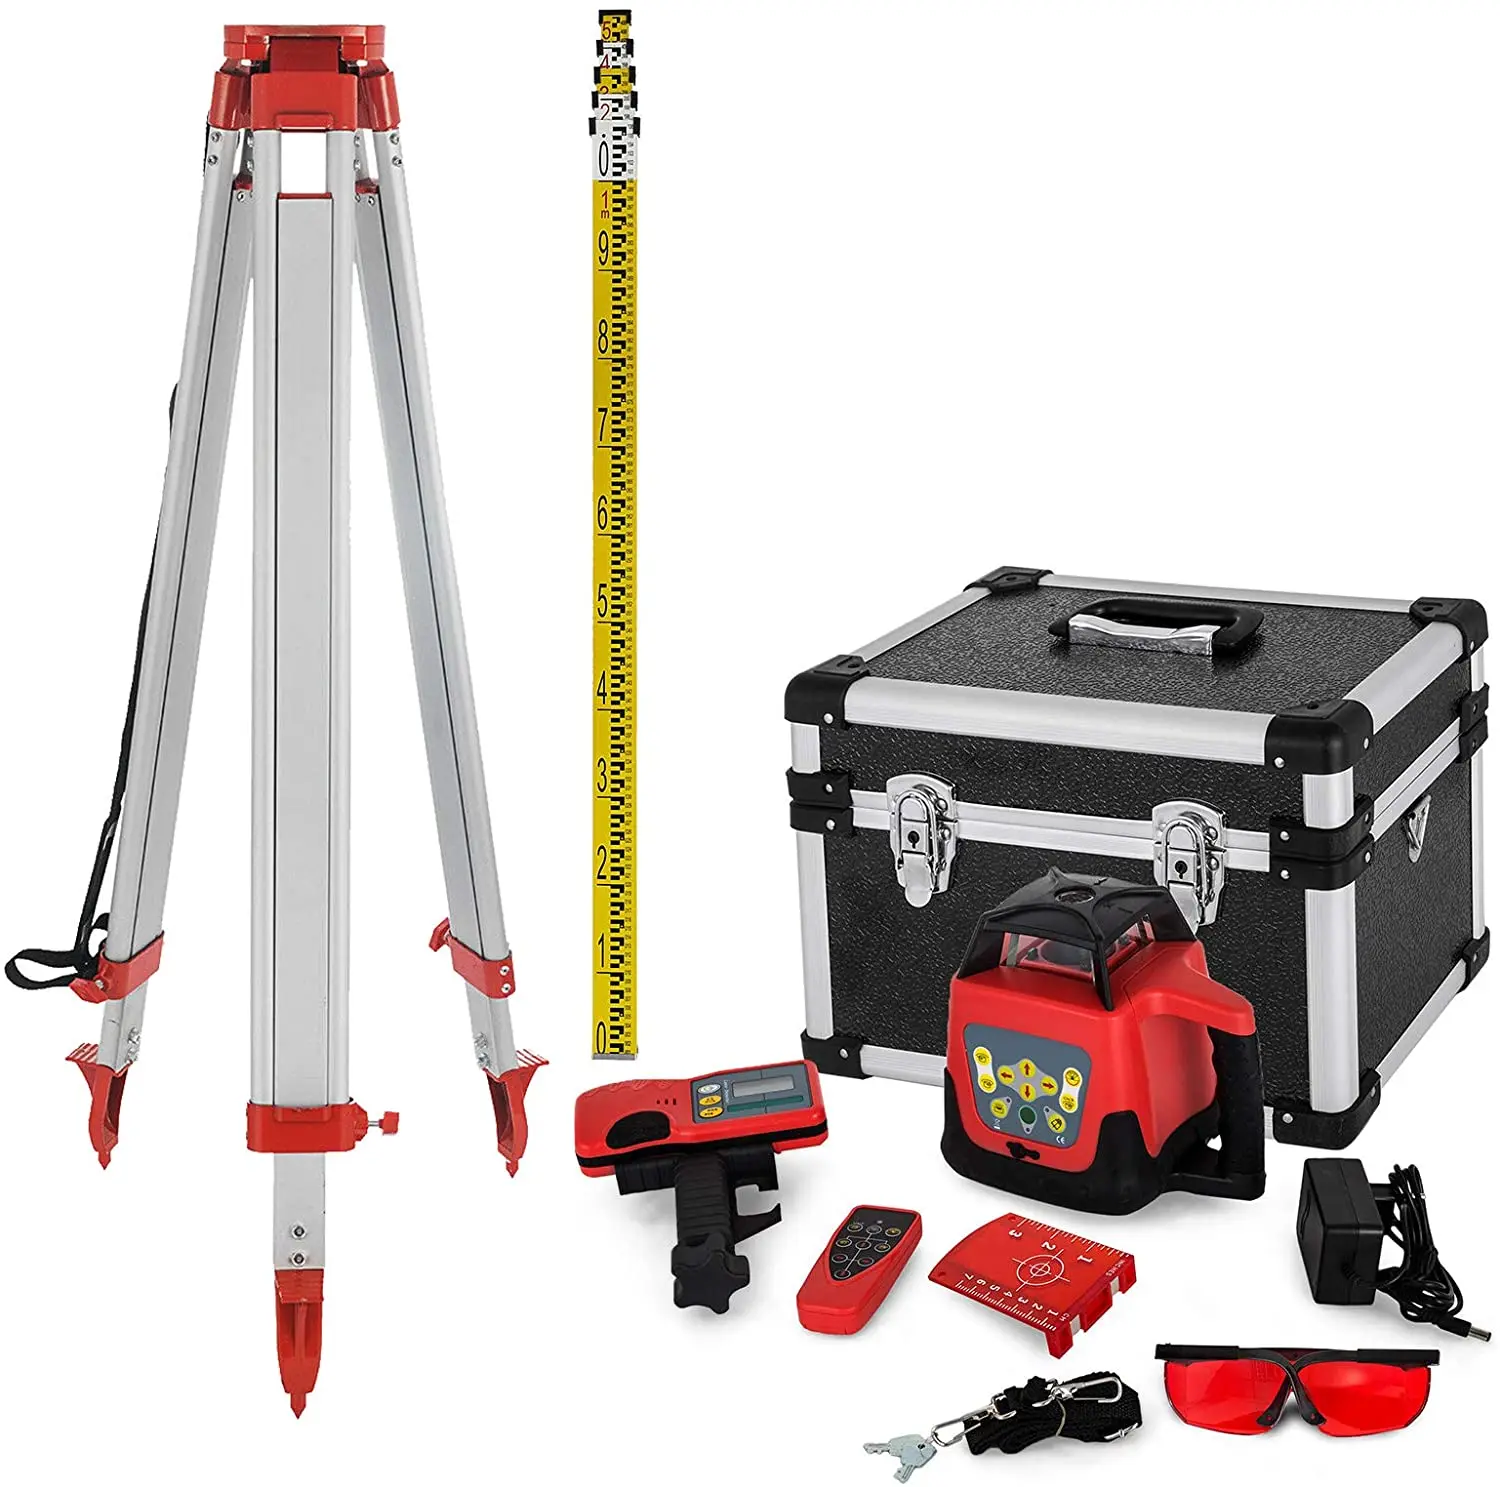 500m Self-Leveling Rotary Grade Laser Level Red/Green Tripod &16' Rod Optional 